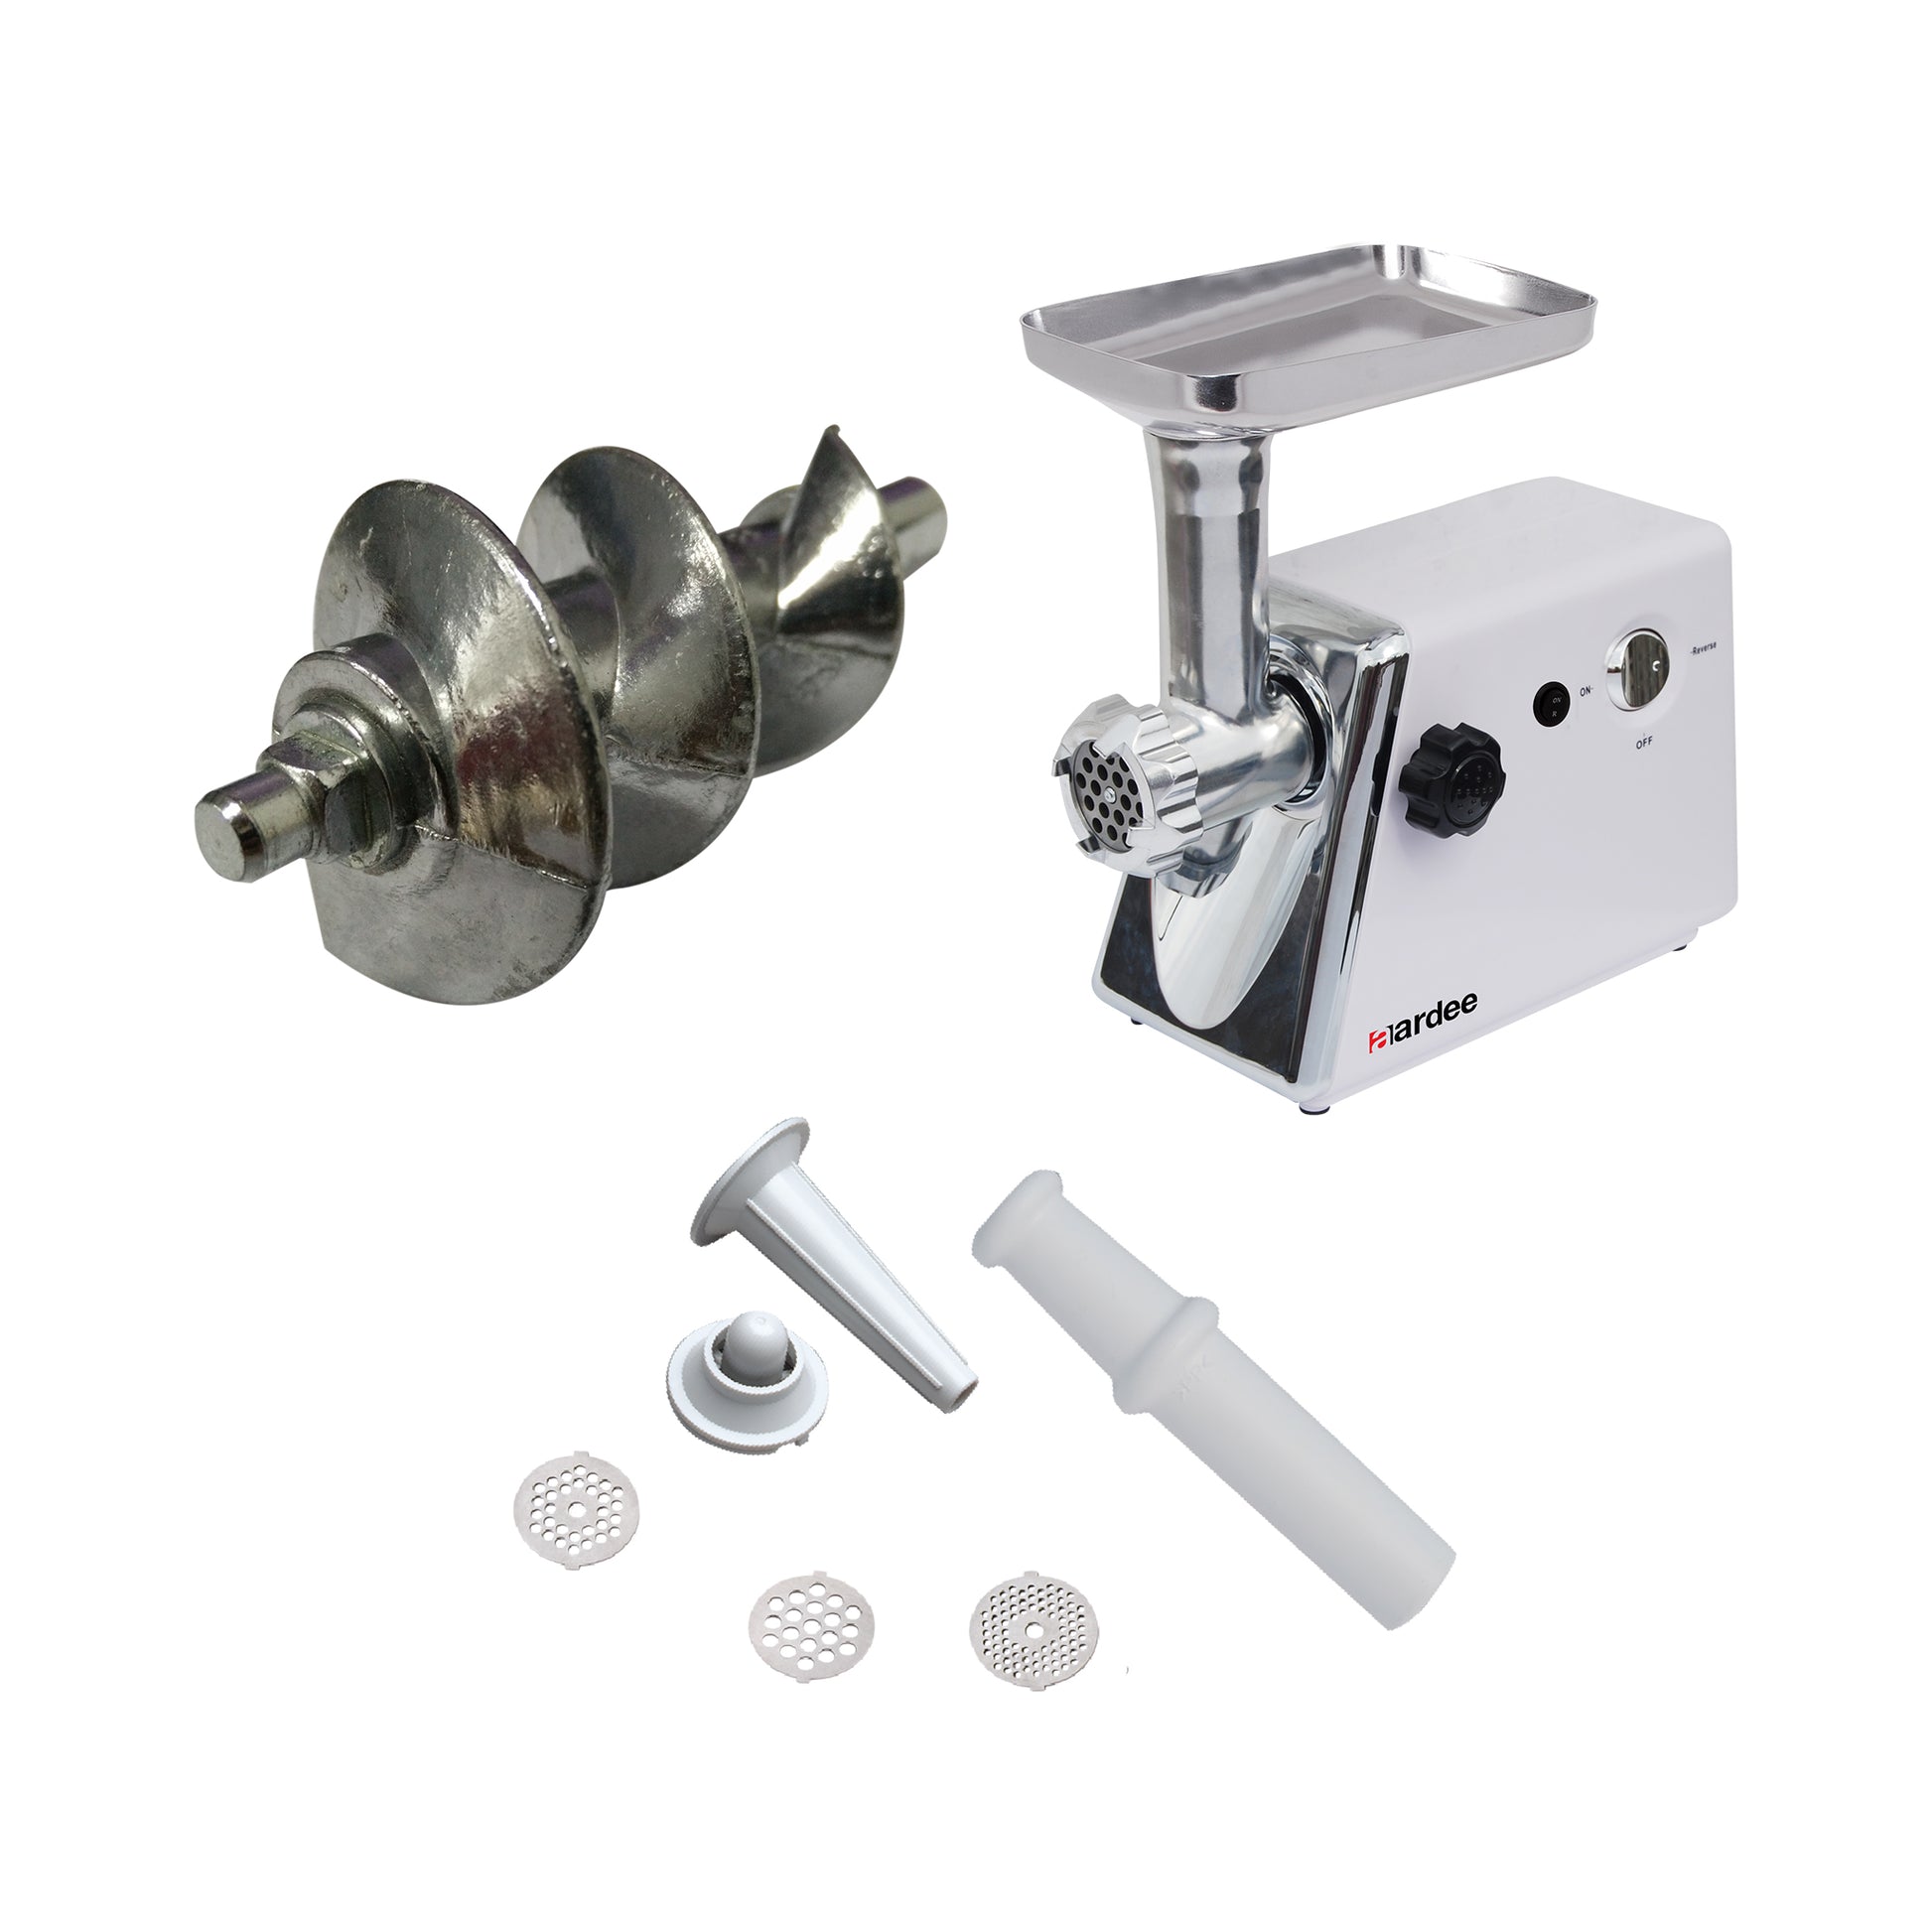 Stainless Steel Electric Meat Grinder